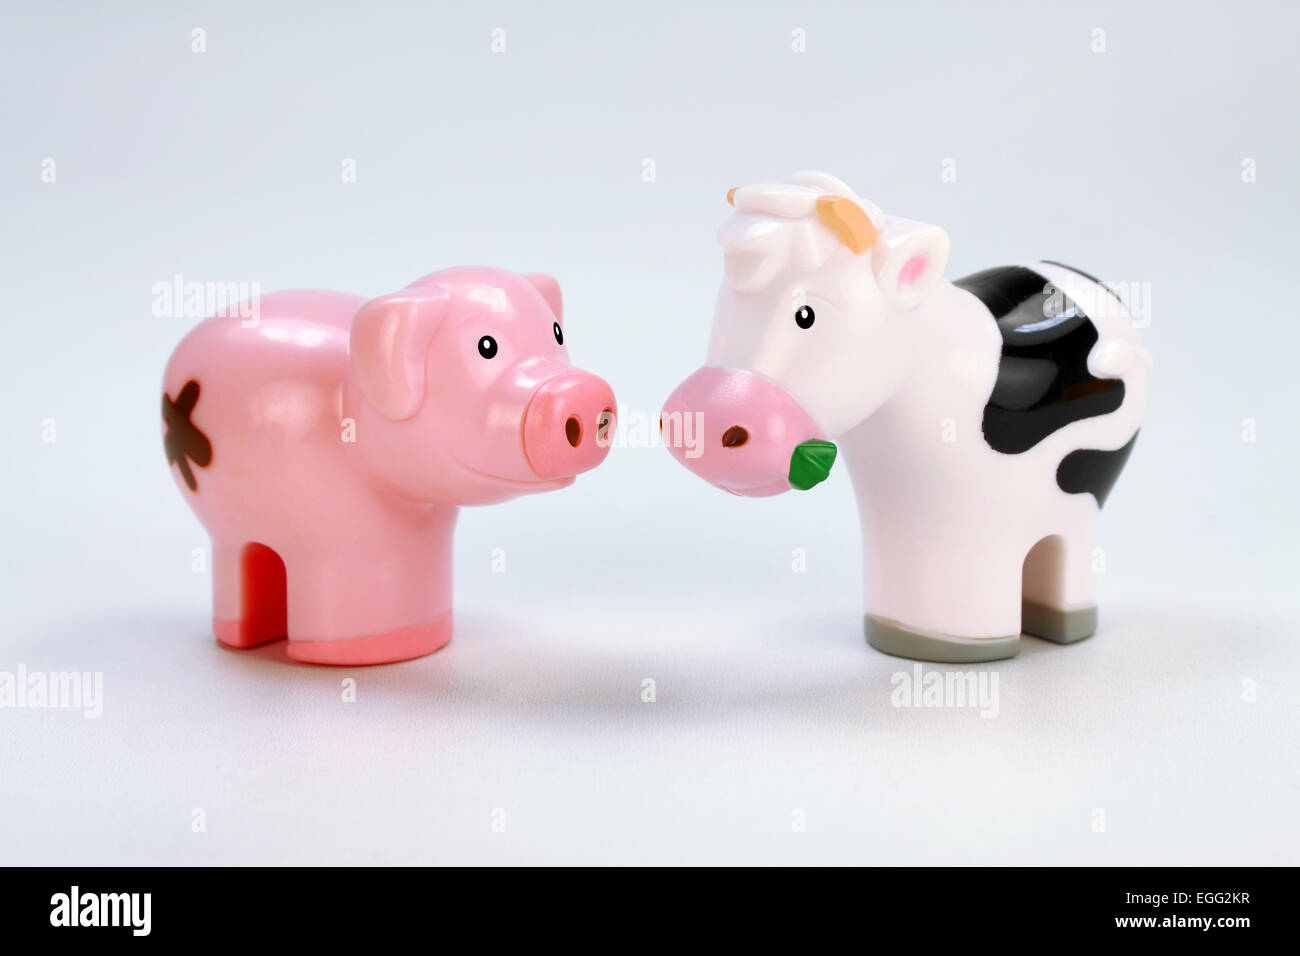 Toy pig and cow on white background Stock Photo